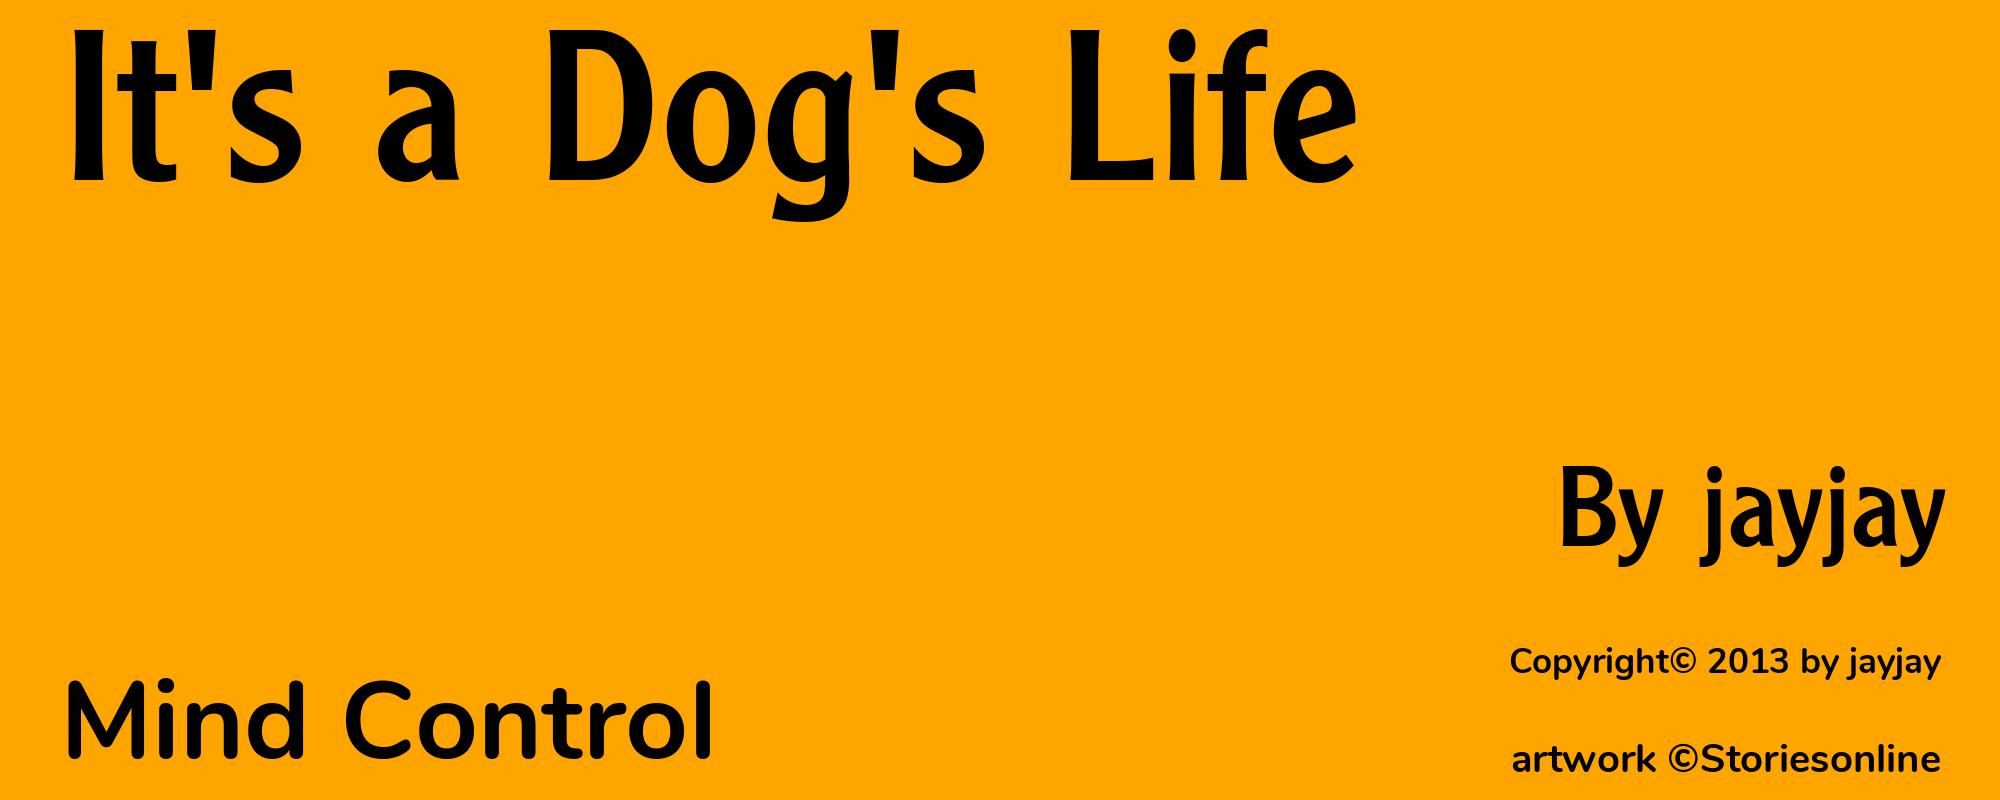 It's a Dog's Life - Cover